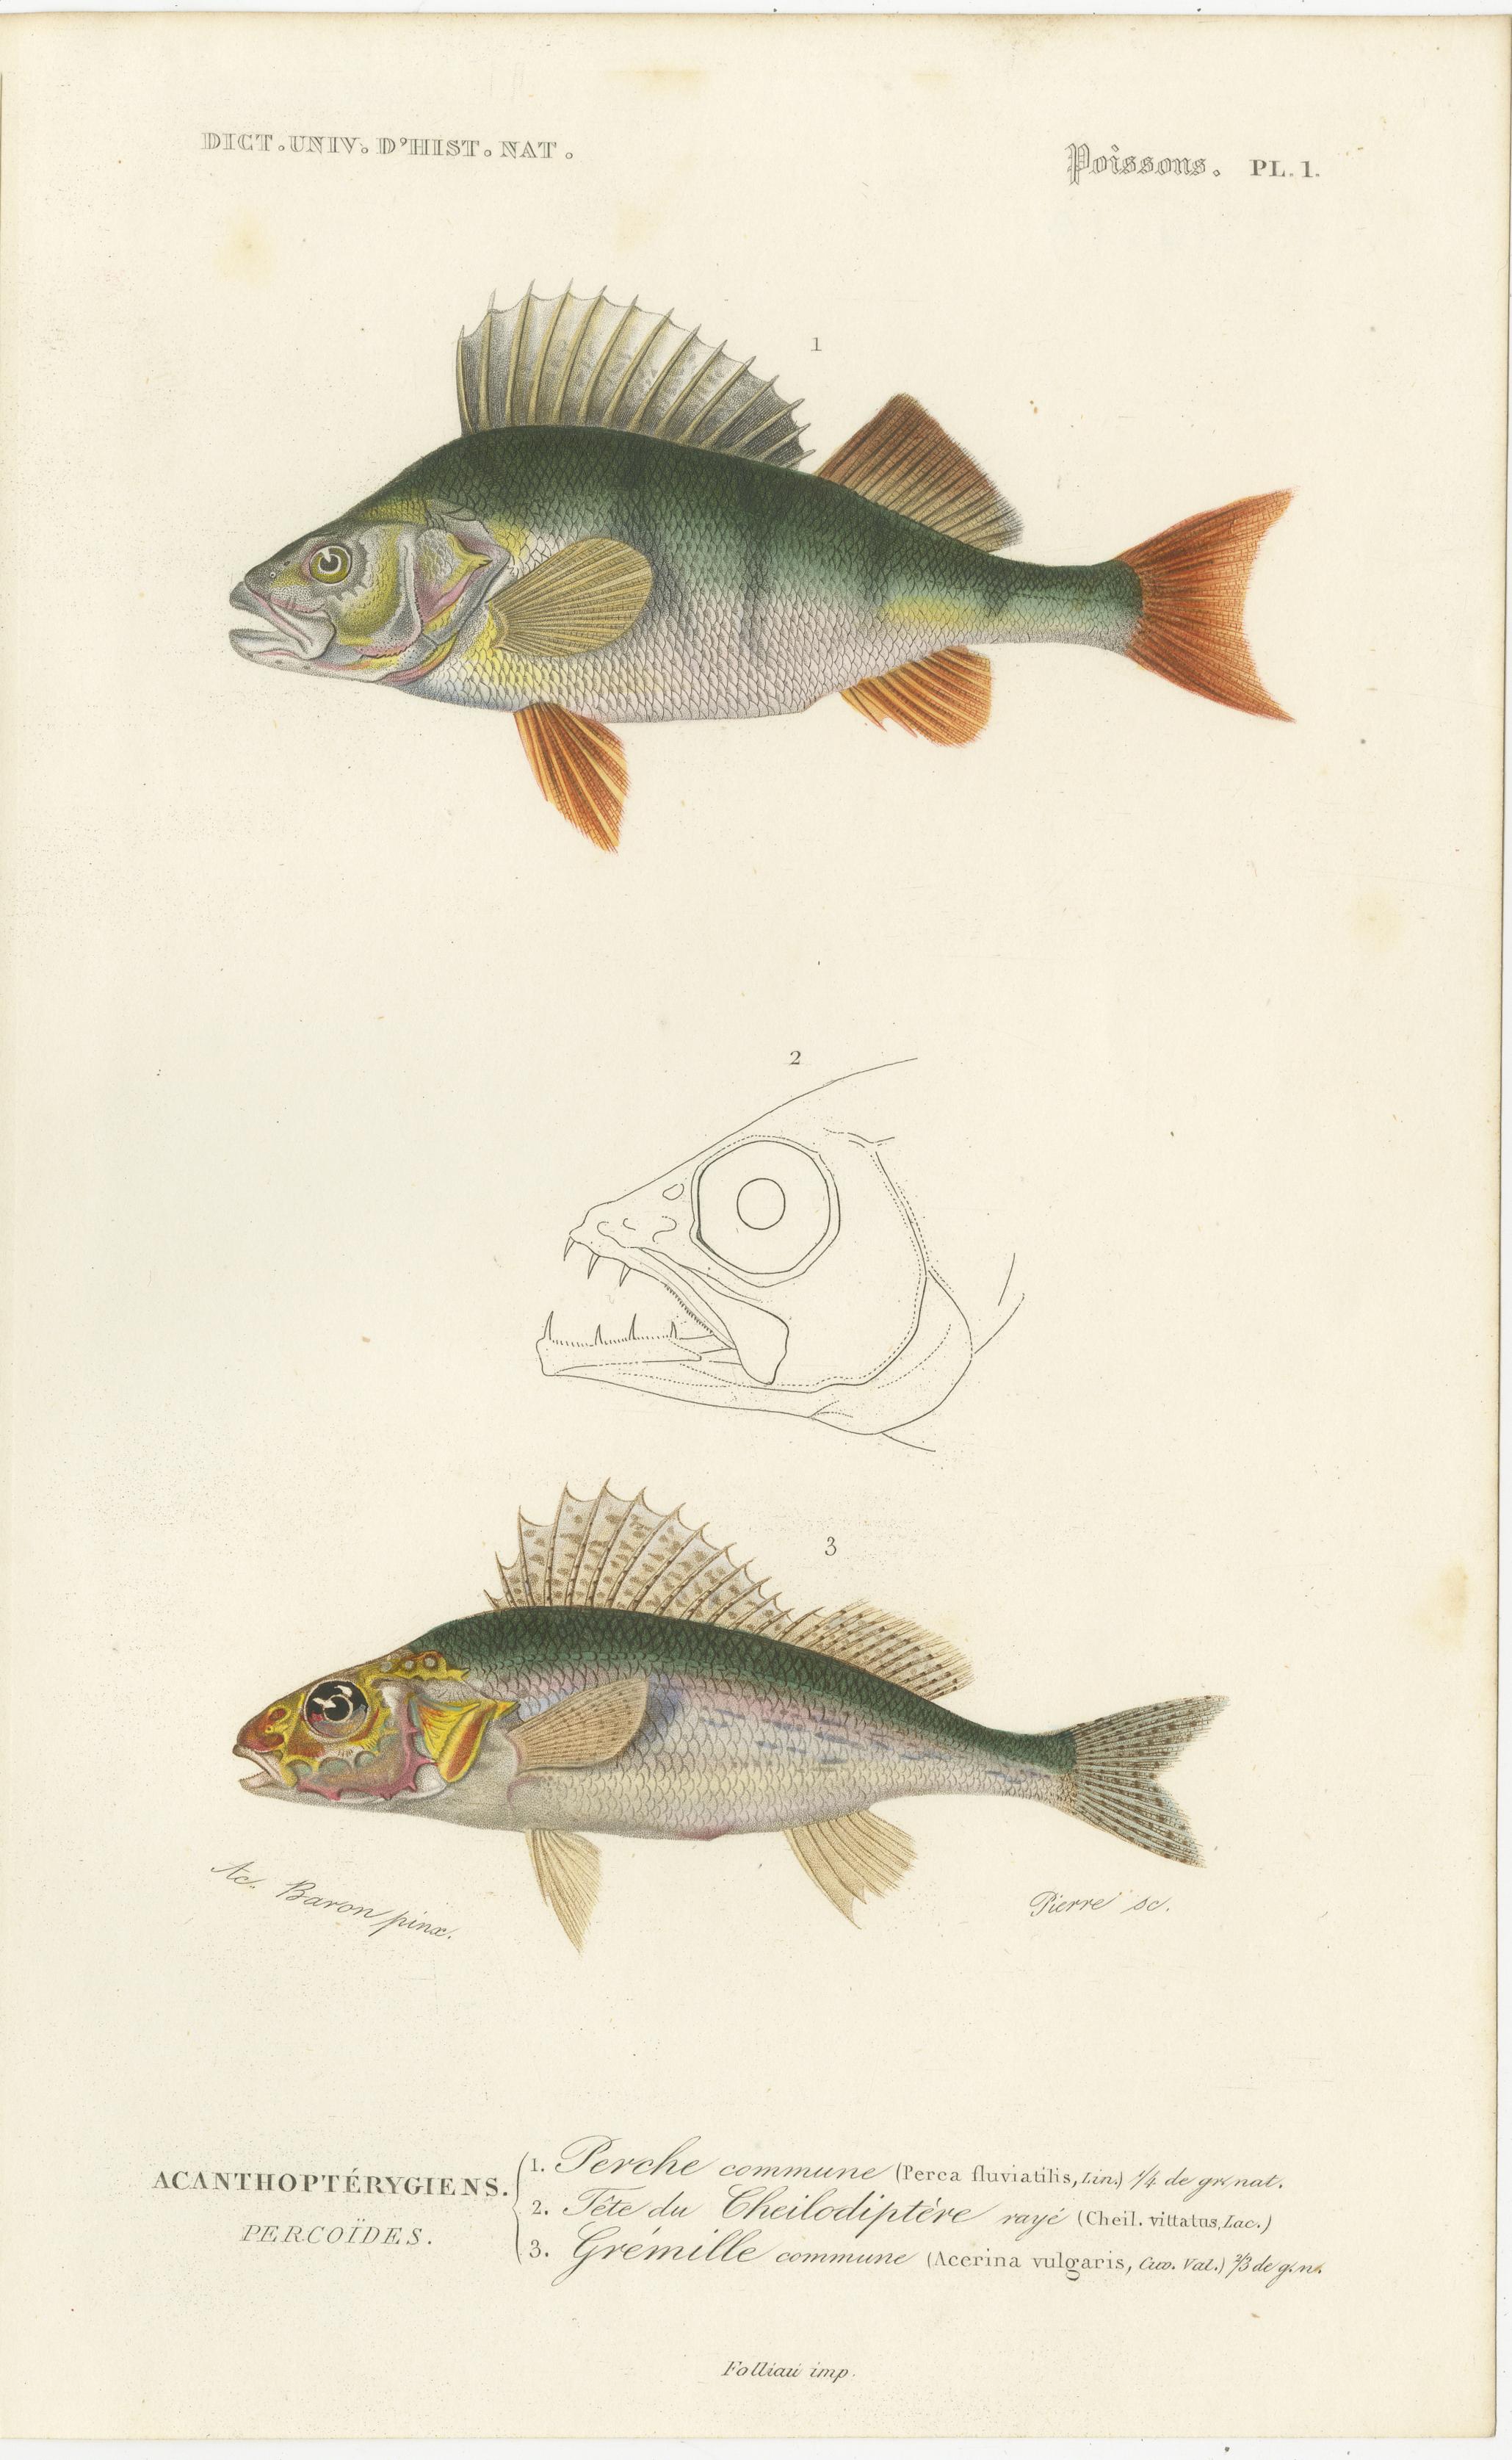 Set of 9 original antique prints of many fish species. These prints originate from 'Dictionnaire universel d'Histoire Naturelle' by d'Orbigny. Published 1861. 

Charles Henry Dessalines d'Orbigny was a French botanist and geologist specializing in